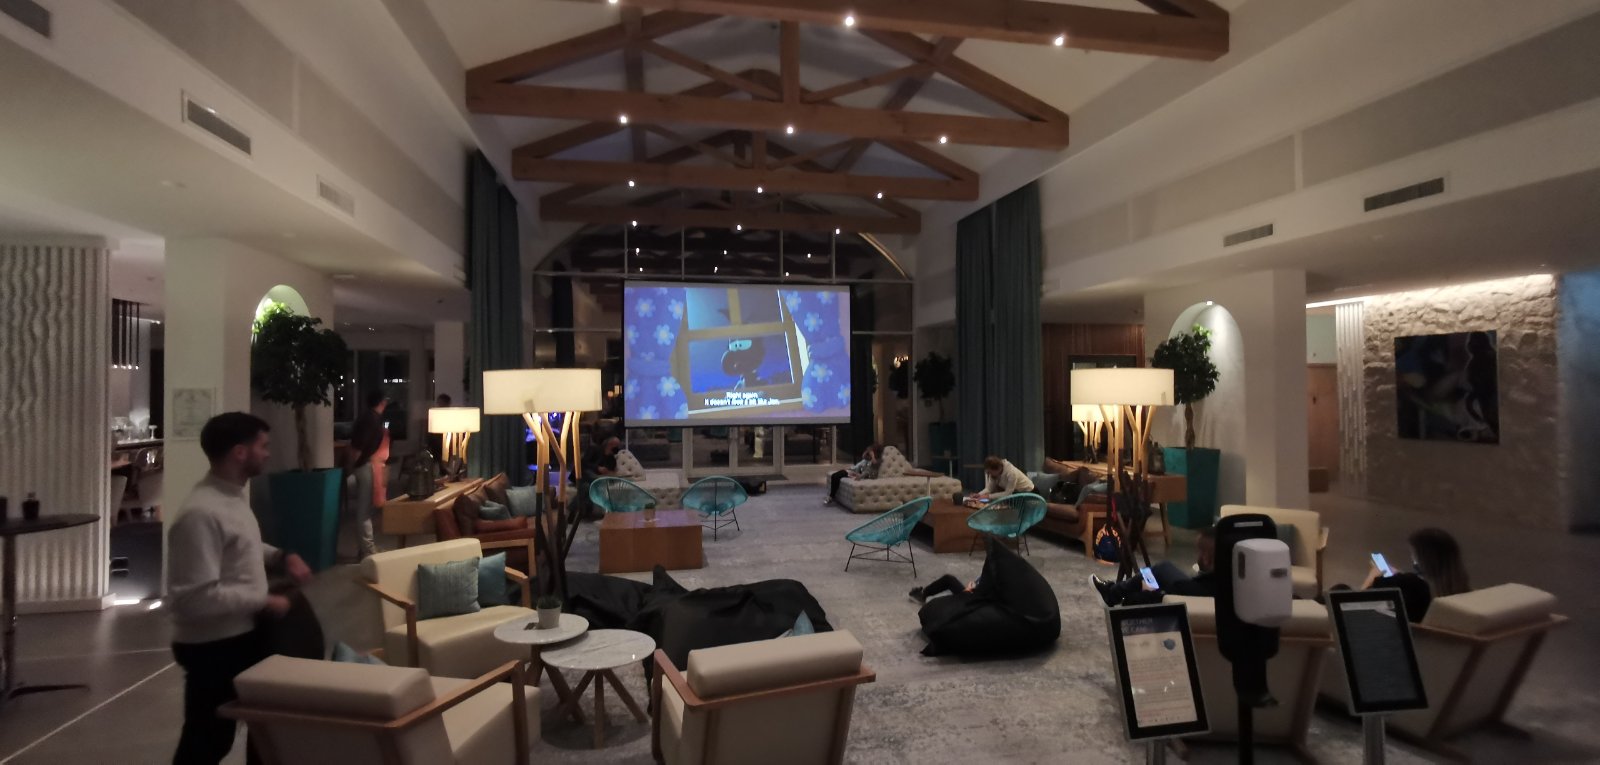 Video projection system at Hotel Chedi, Lustica Bay